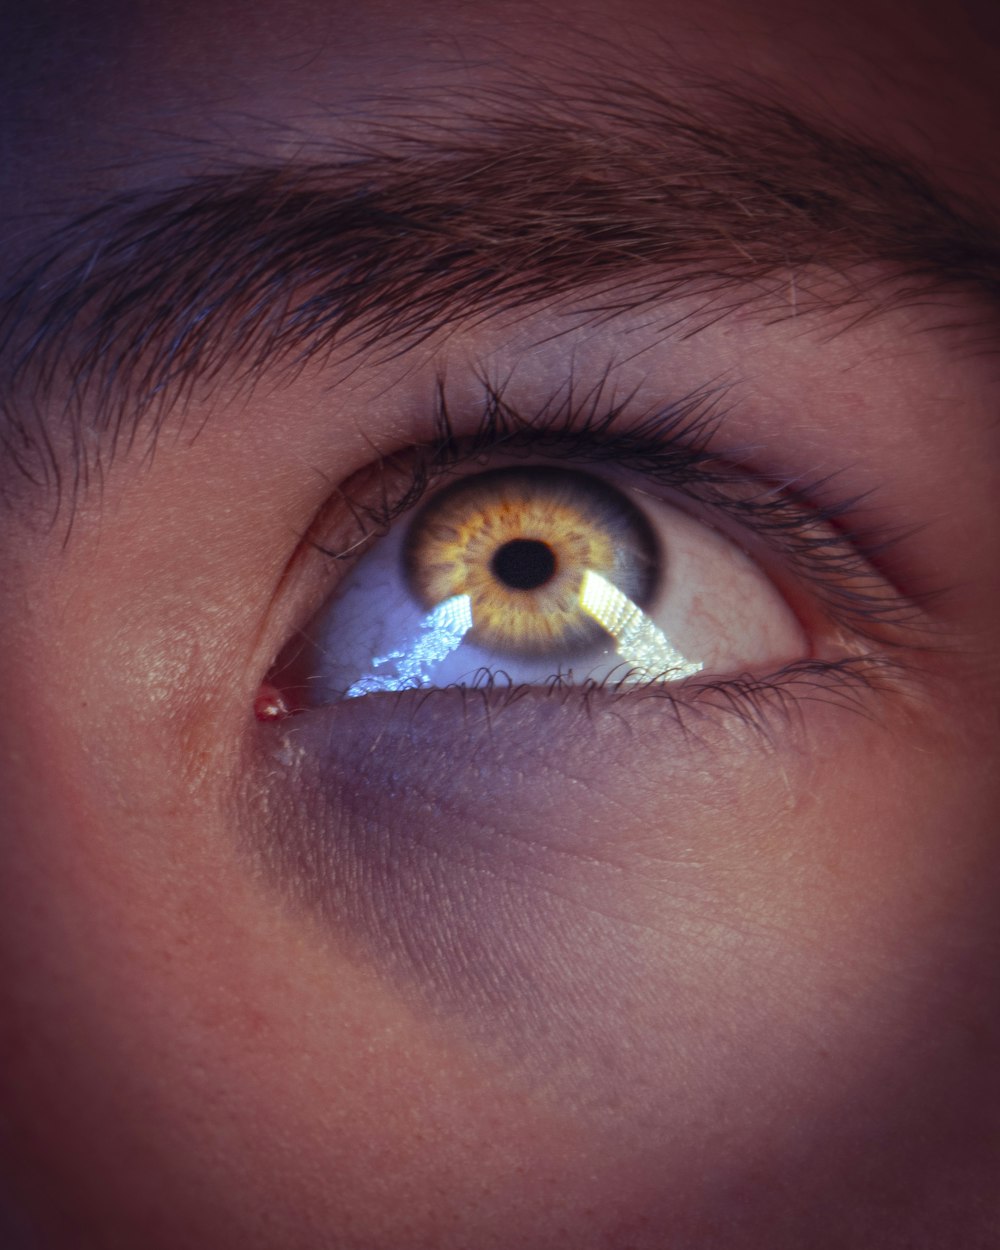 a man's eye with the reflection of an eyeball in it